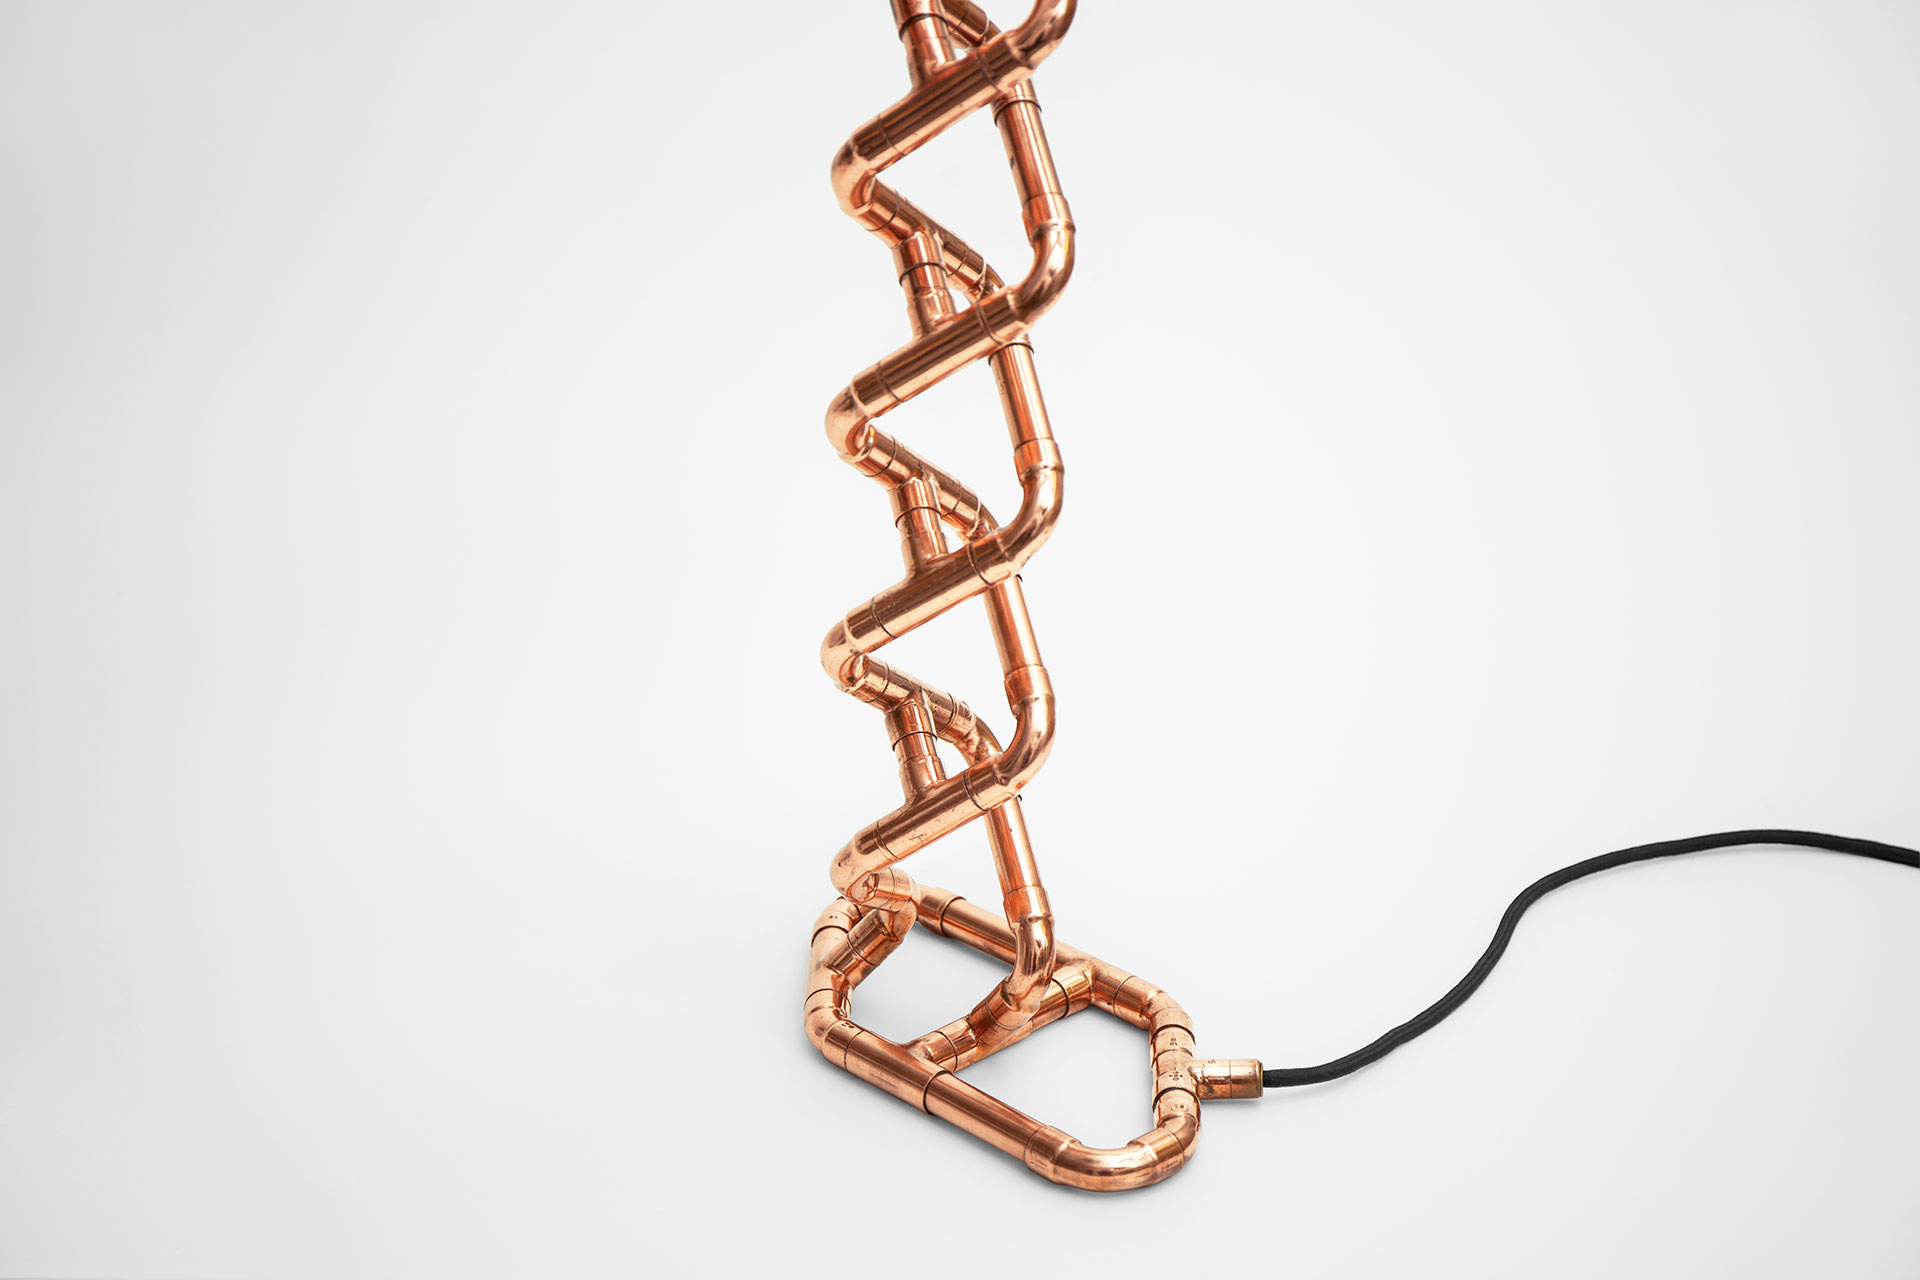 Copper pipe sculpture table lamp inspired by DNA double helix